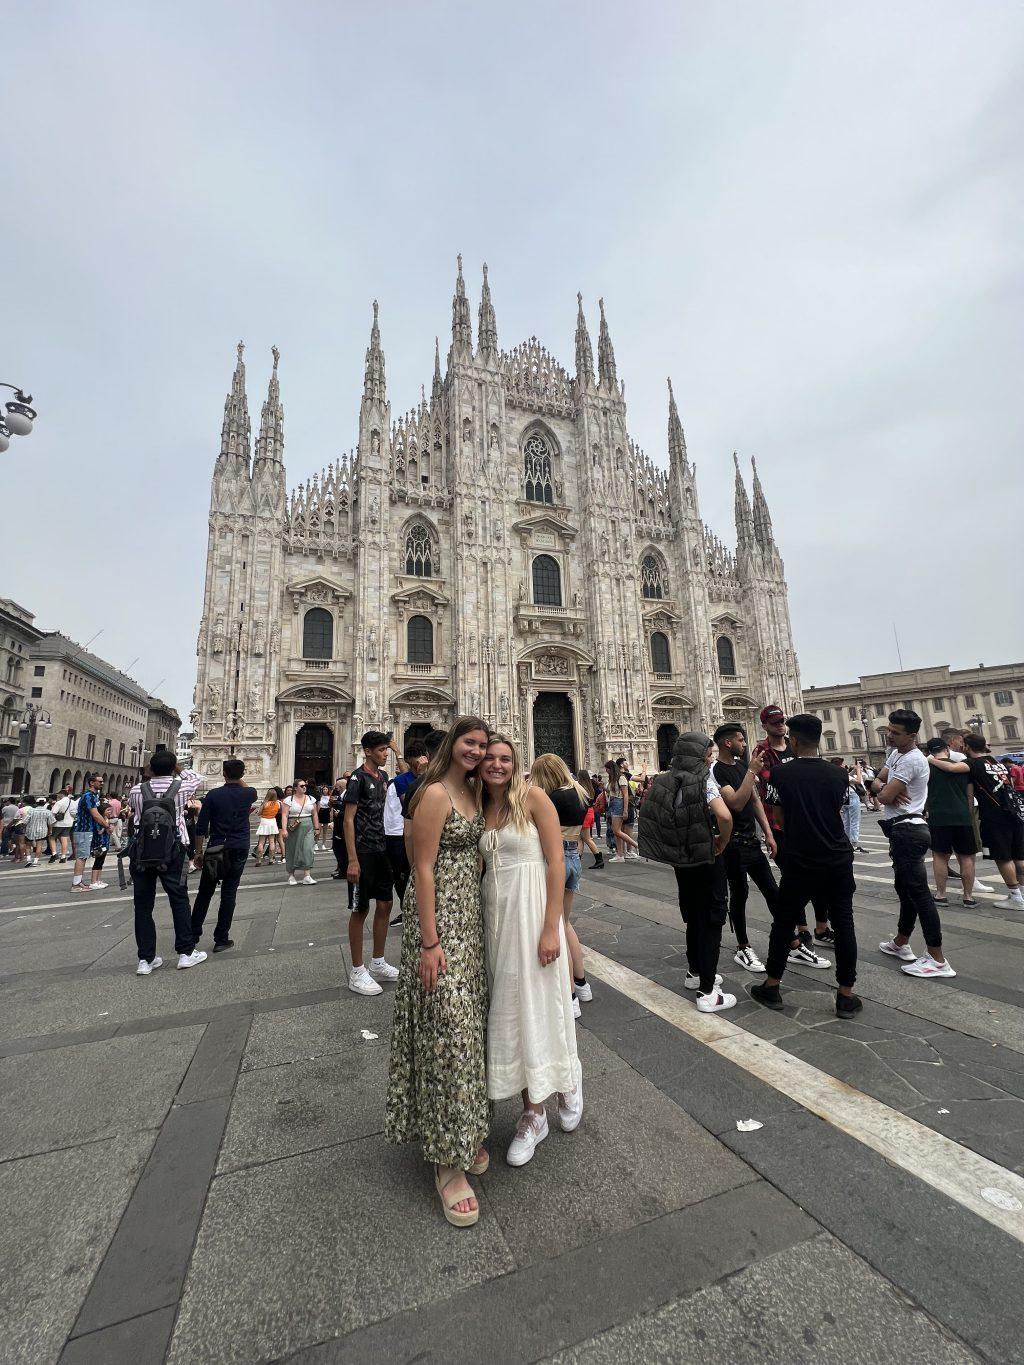 Zubas and I stand in front of the Milan Cathedral. The Cathedral was even bigger in person than it looks on any pictures and was beautiful to see.